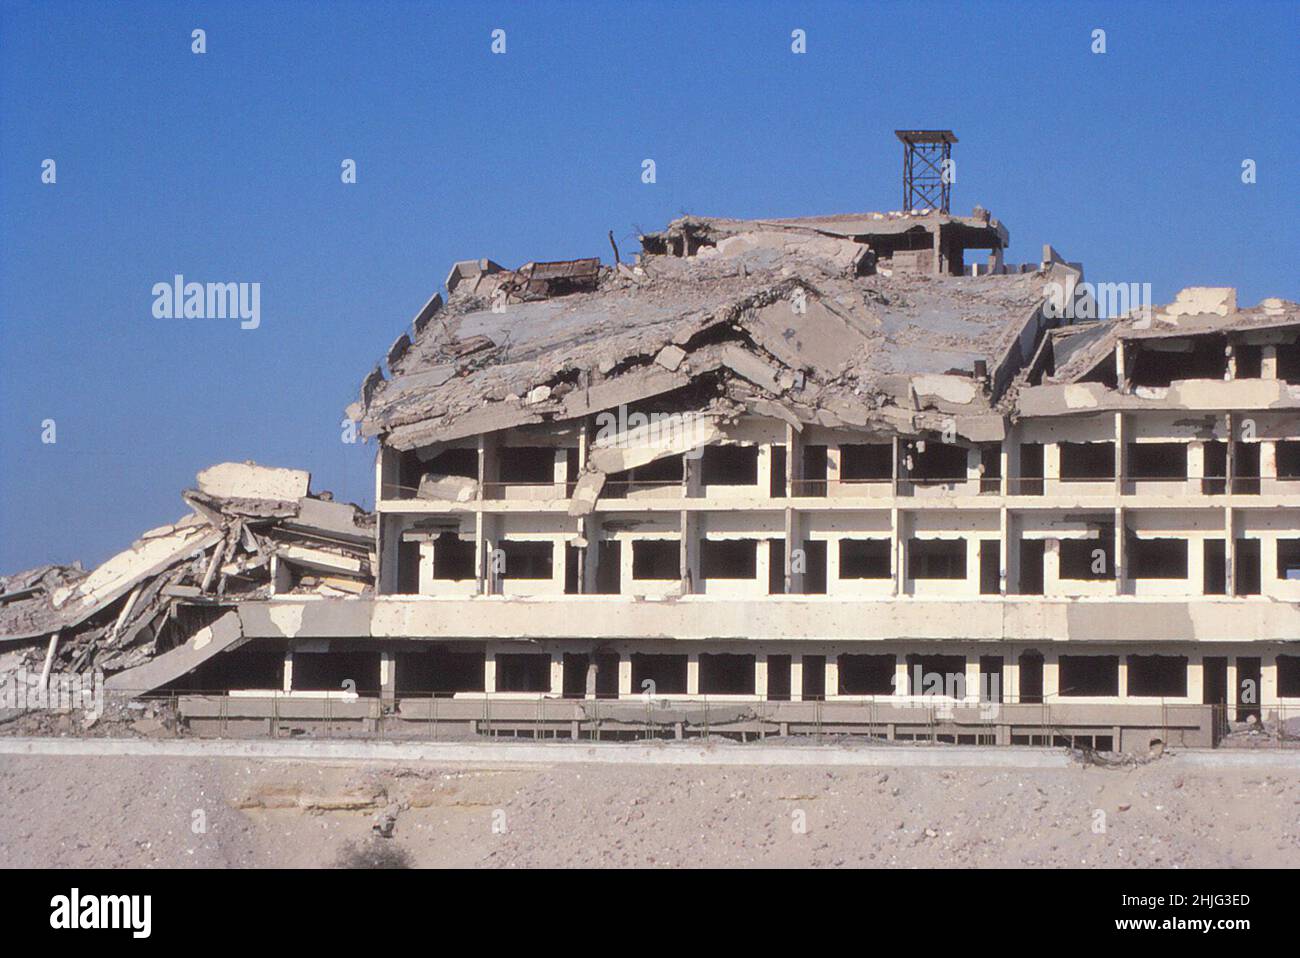 War-damaged building alongside the Suez Canal somewhere between Port Said and Ismailia, Egypt, 10th February 1978 Stock Photo